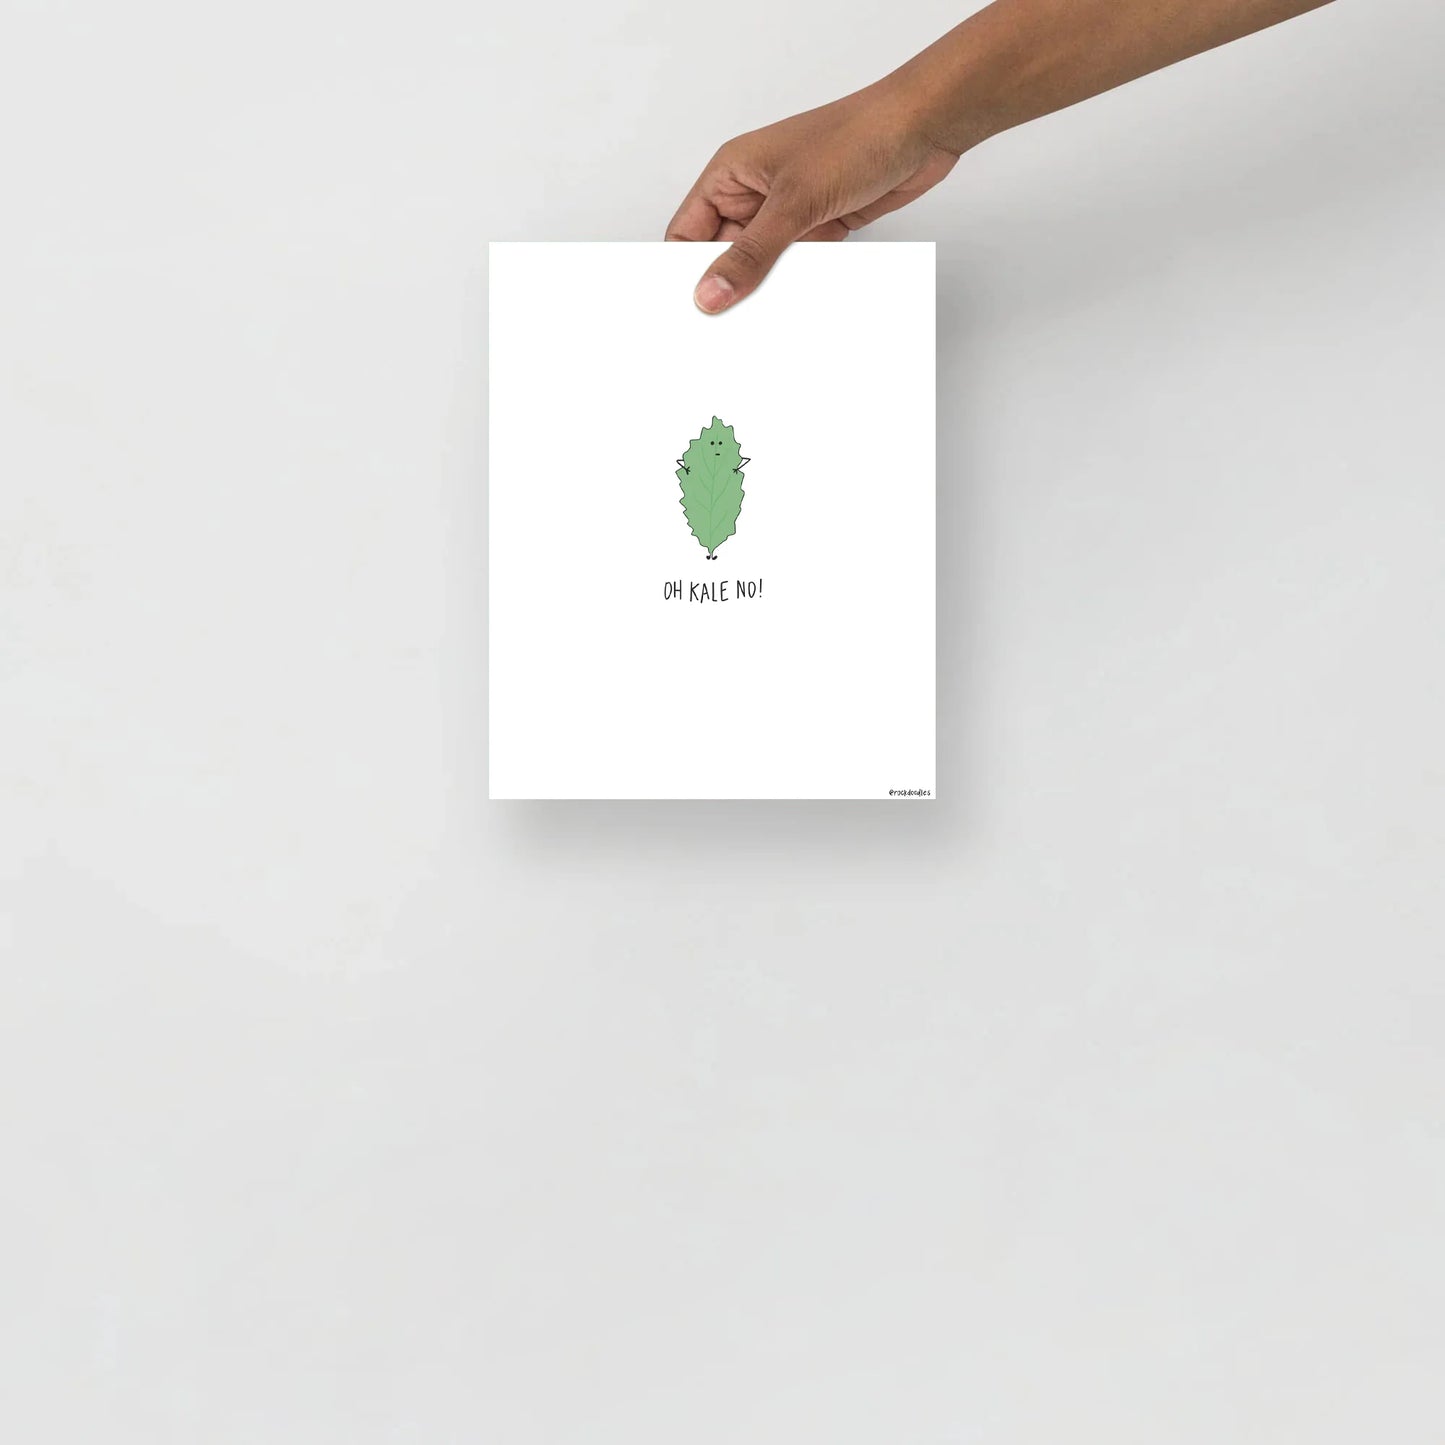 A person holding up a framed poster with the Kale No Print by rockdoodles, featuring a green leaf on matte paper.